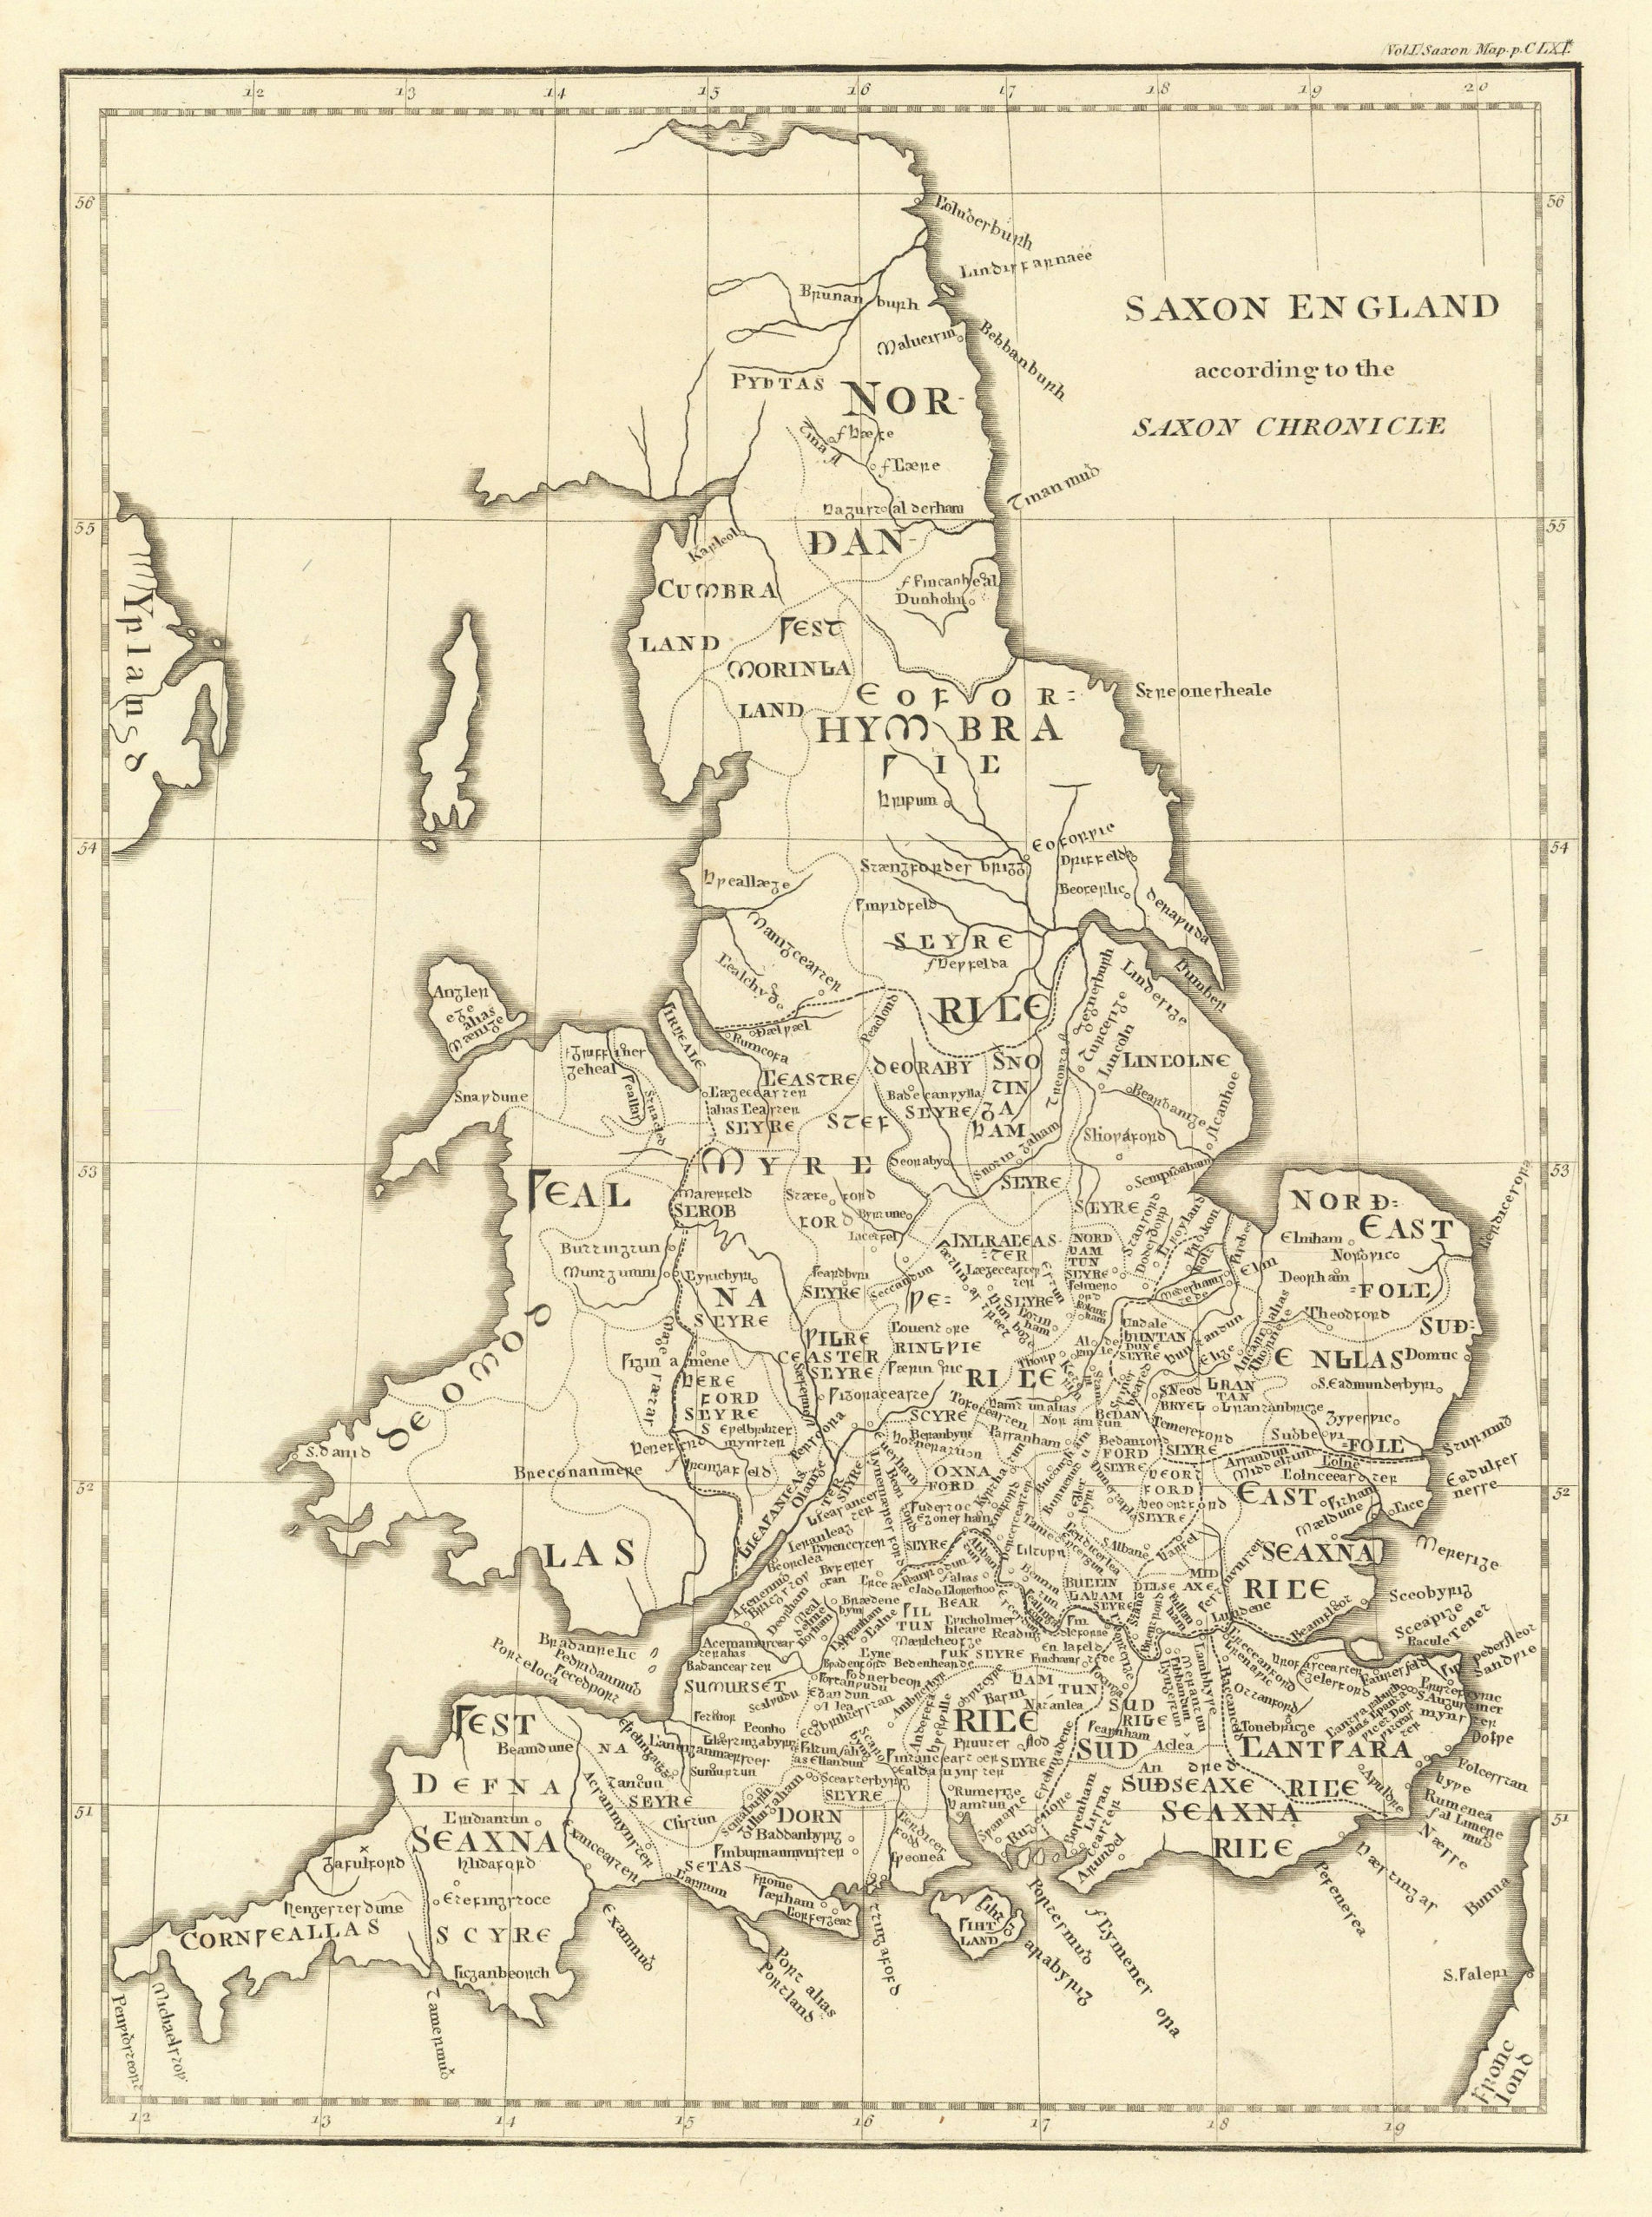 Associate Product "Saxon England according to the Saxon Chronicle", by John CARY 1806 old map